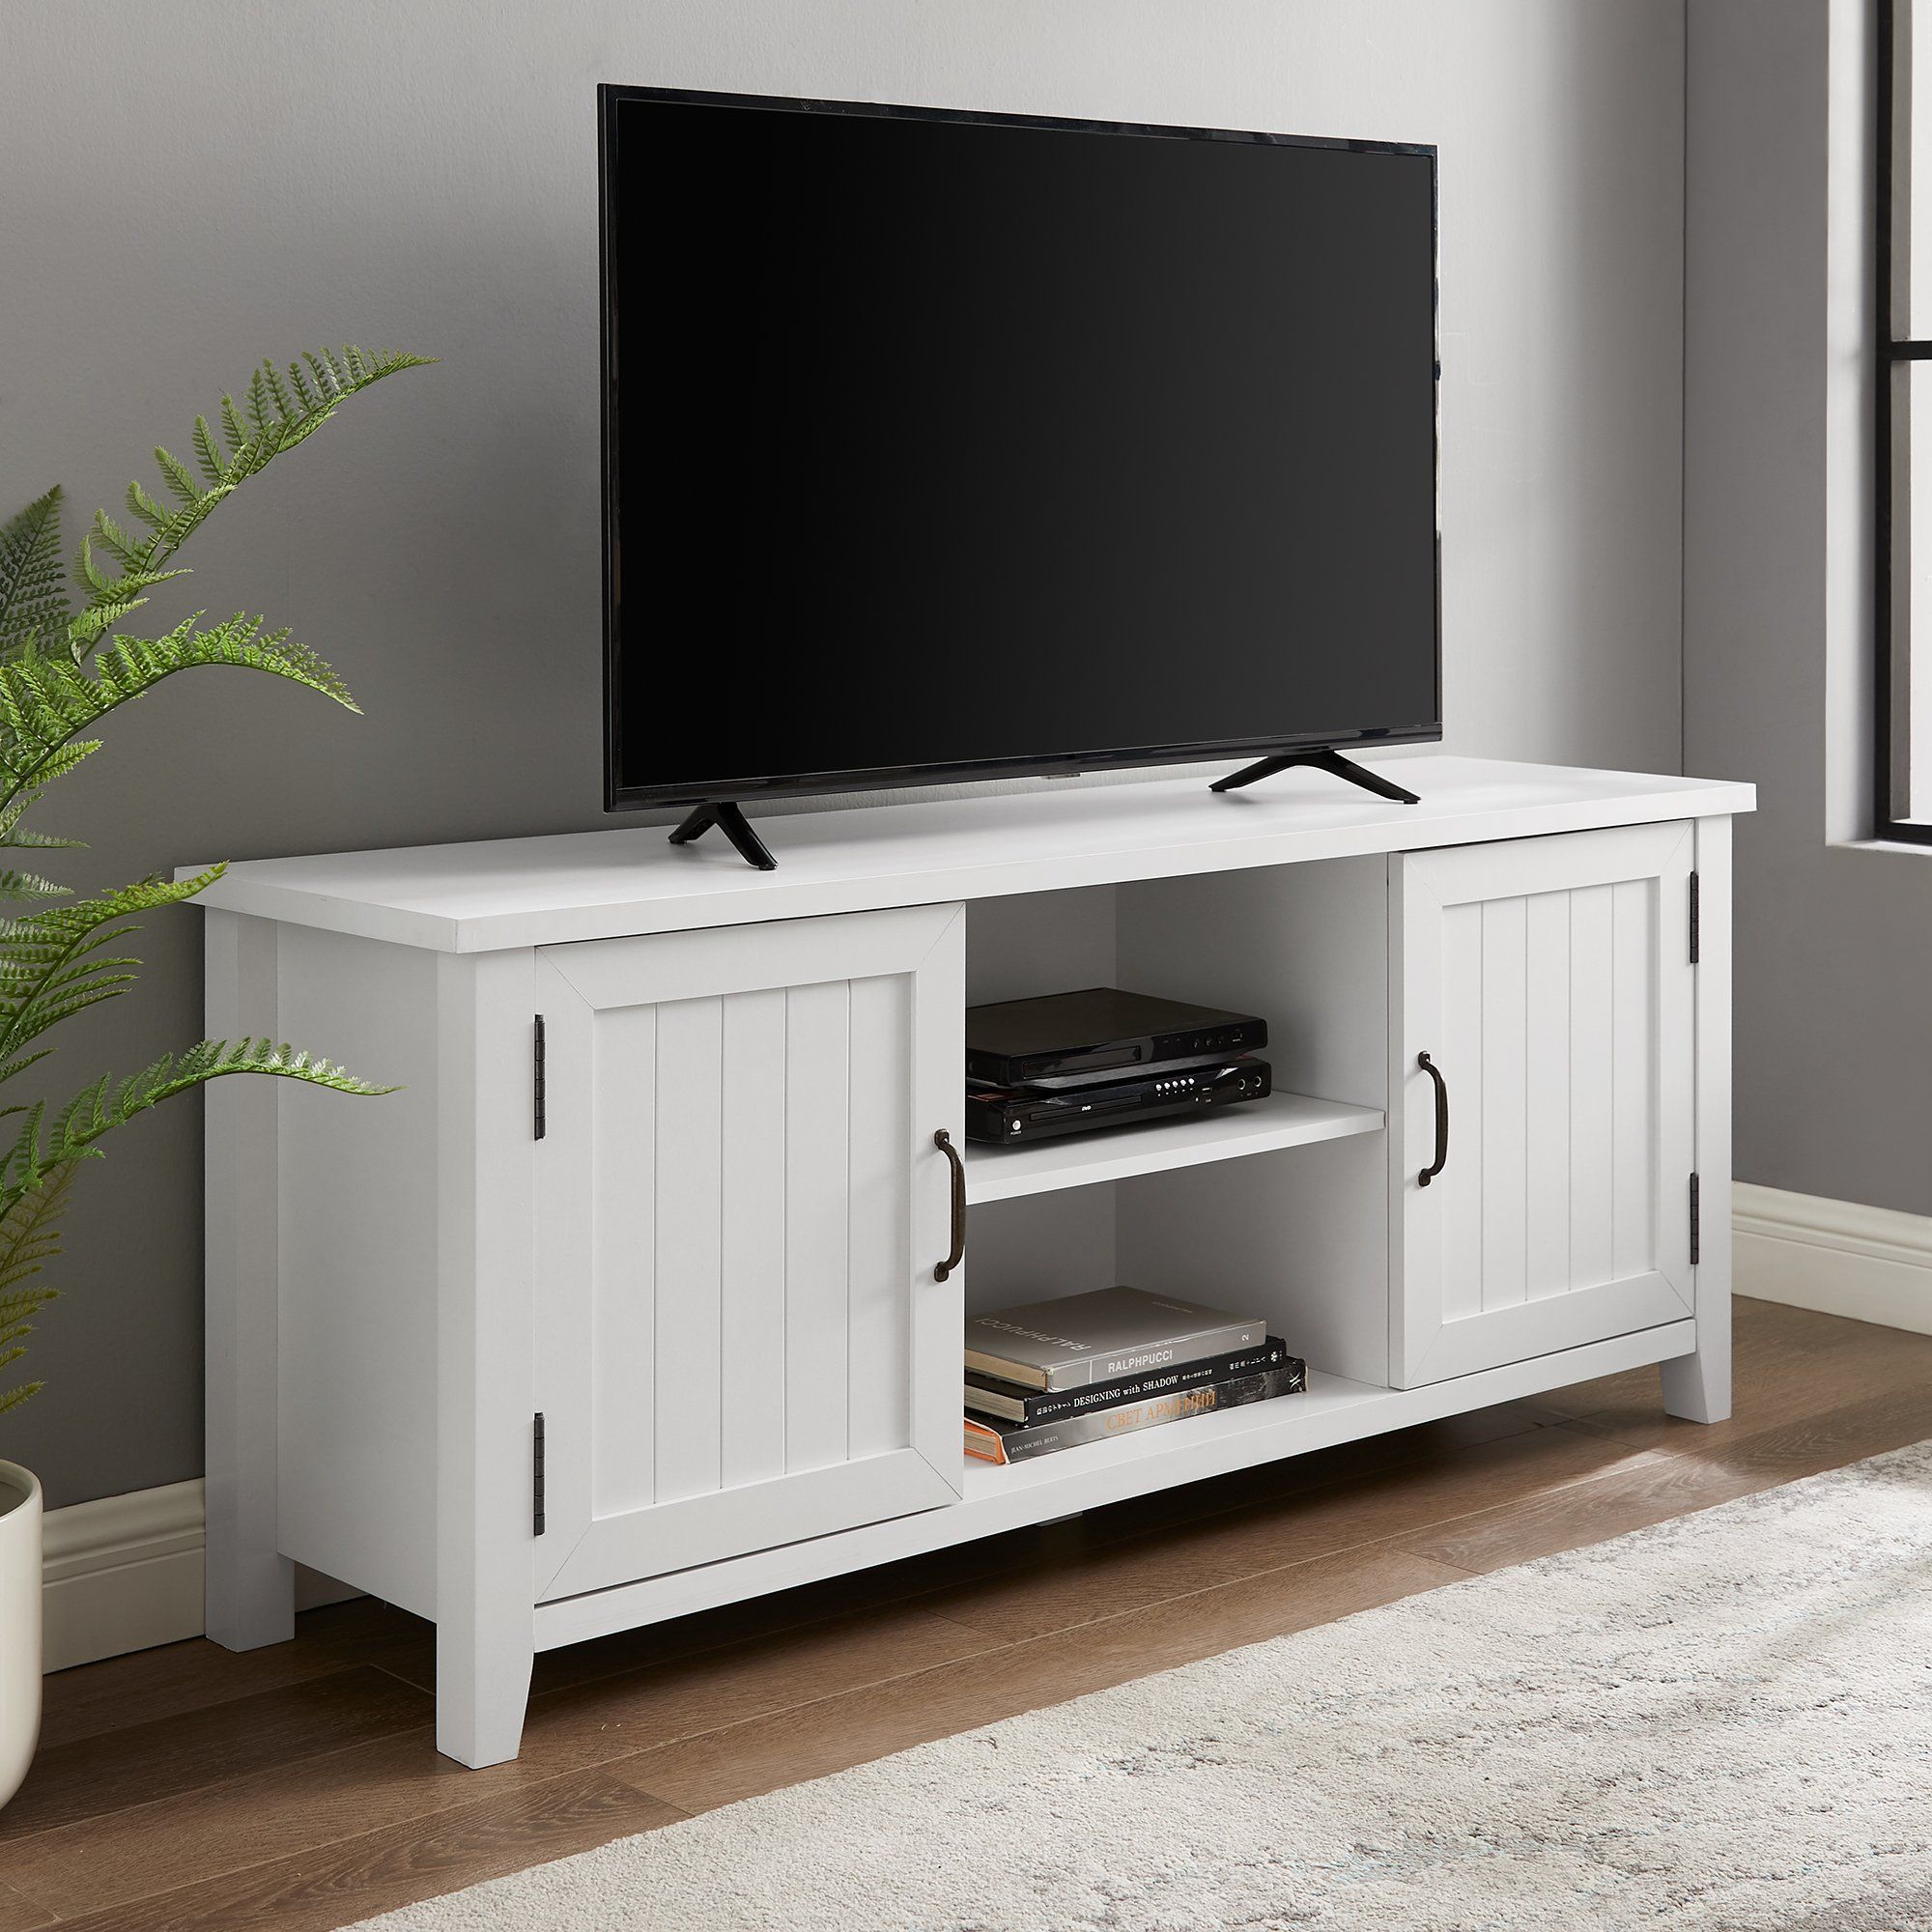 Solid White 58 Inch Grooved Door Tv Stand – Coastal Pertaining To Walker Edison Farmhouse Tv Stands With Storage Cabinet Doors And Shelves (View 2 of 15)